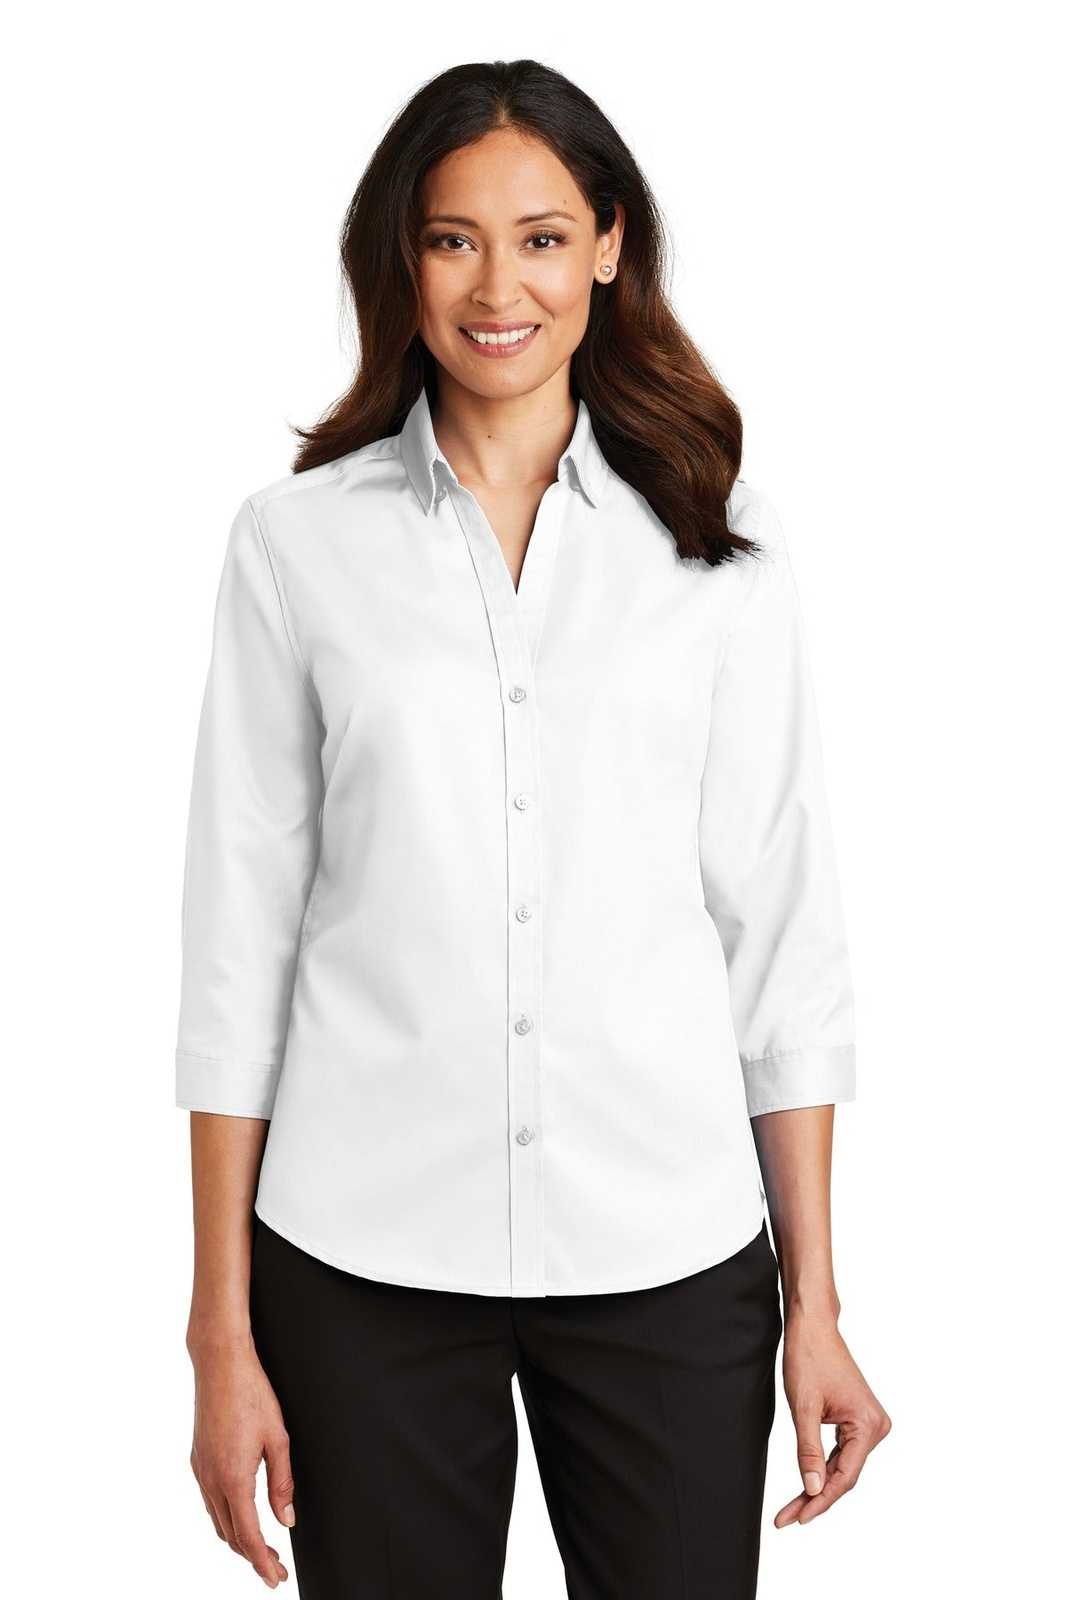 Port Authority L665 Ladies 3/4-Sleeve Superpro Twill Shirt - White - HIT a Double - 1